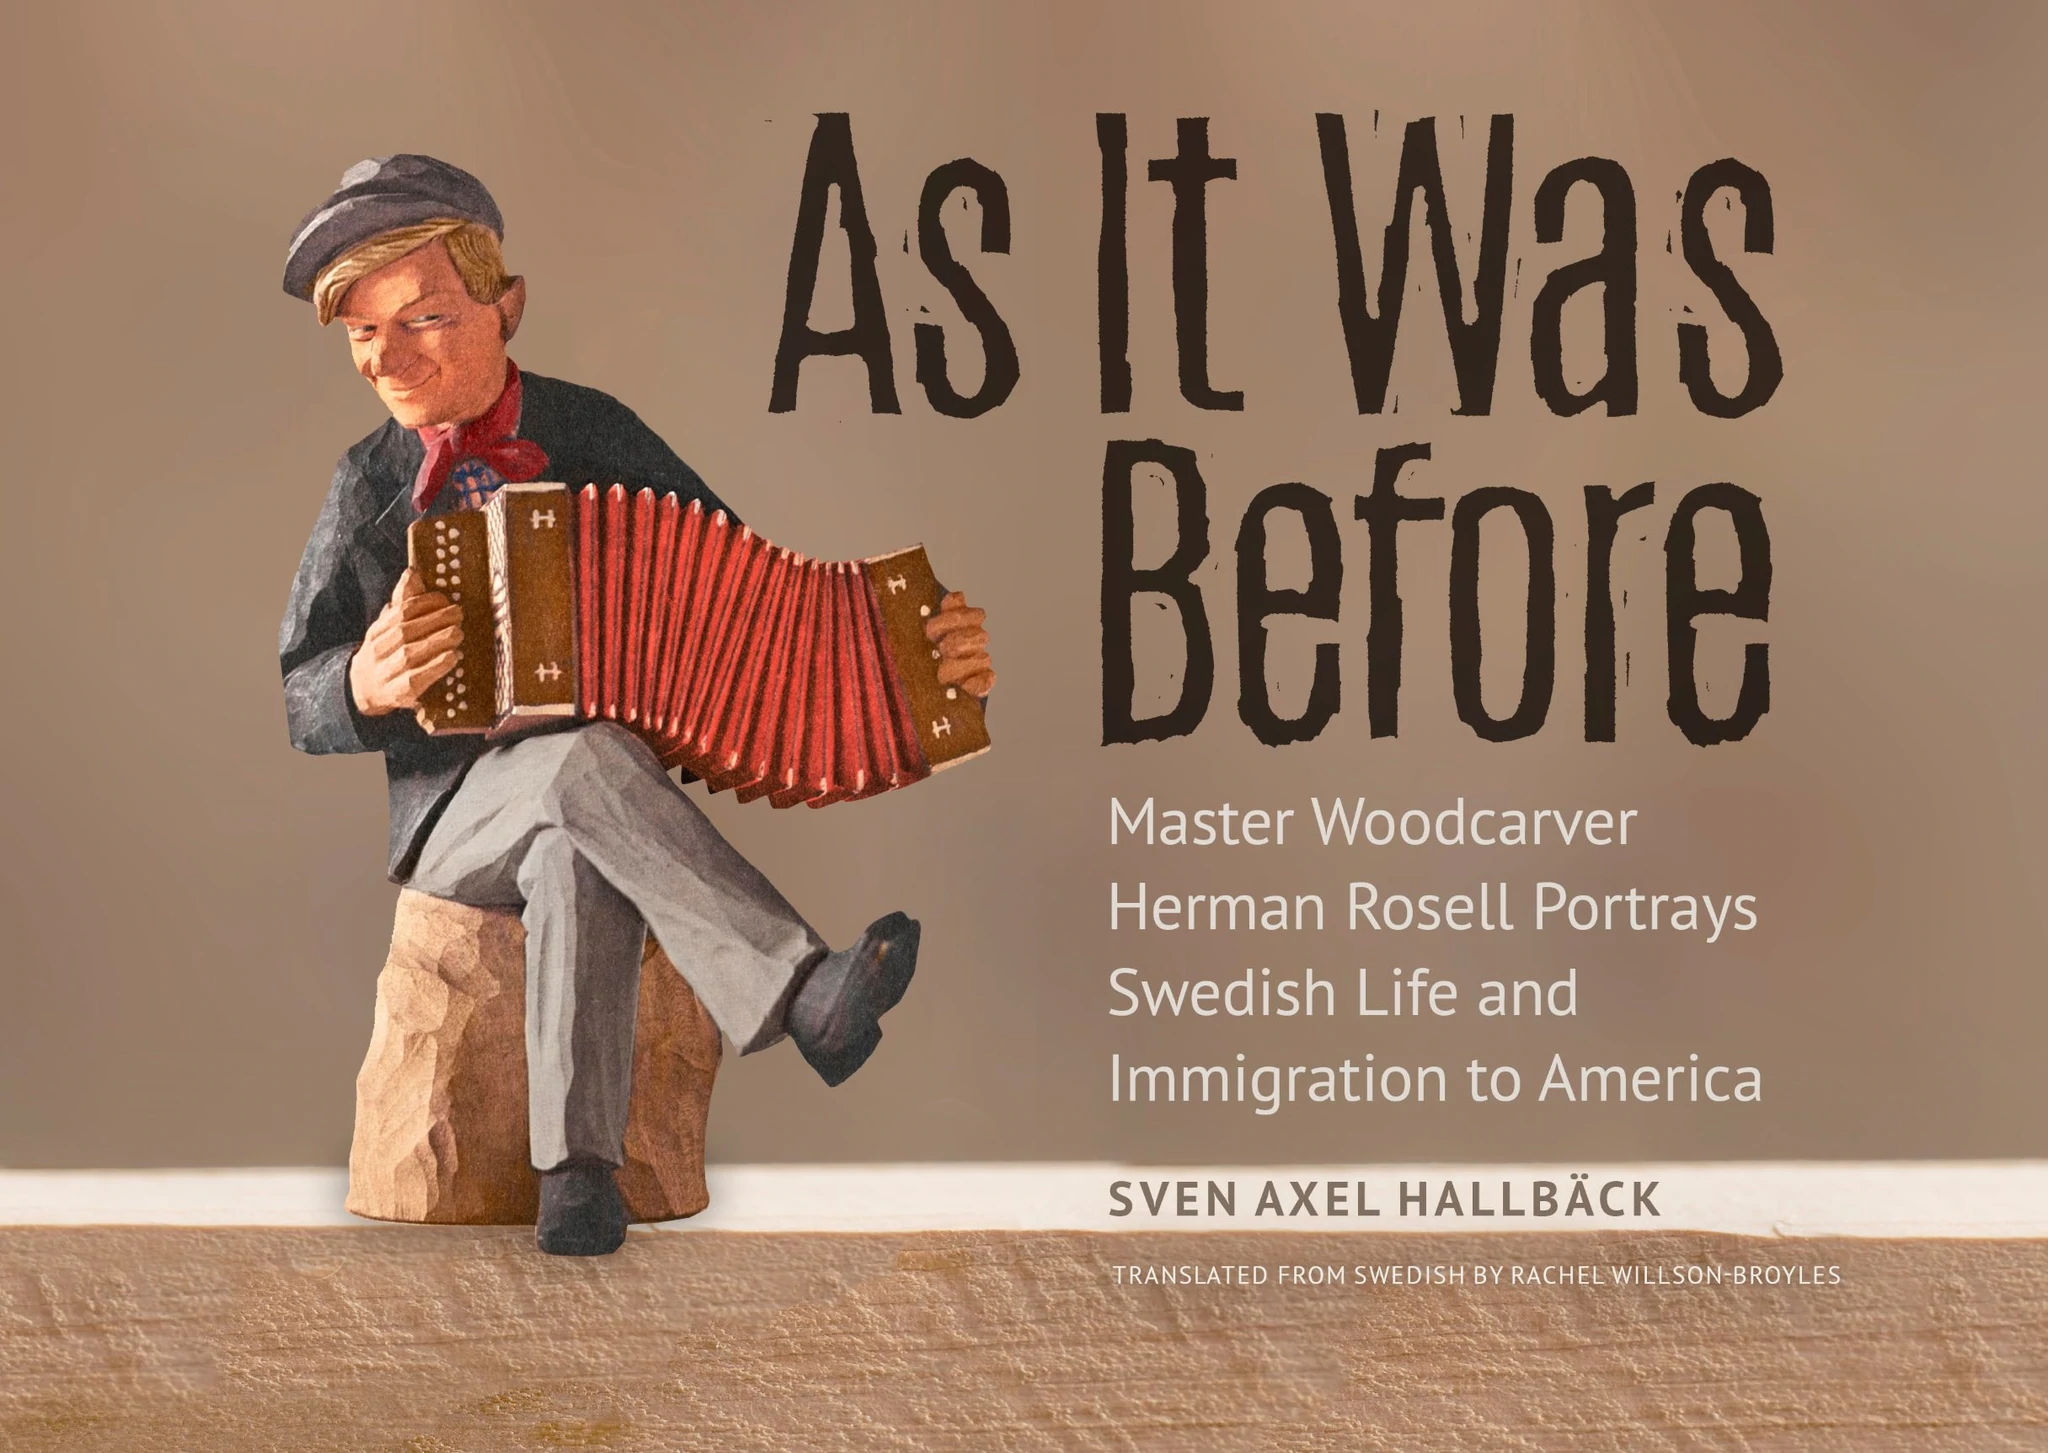  As It Was Before, Master Woodcarver Herman Rosell Portrays Swedish Life and Immigration to America. By Sven Axel Hallbäck. Translated from the Swedish by Rachel Willson-Broyles. Links to American Swedish Institute Museum Store. 